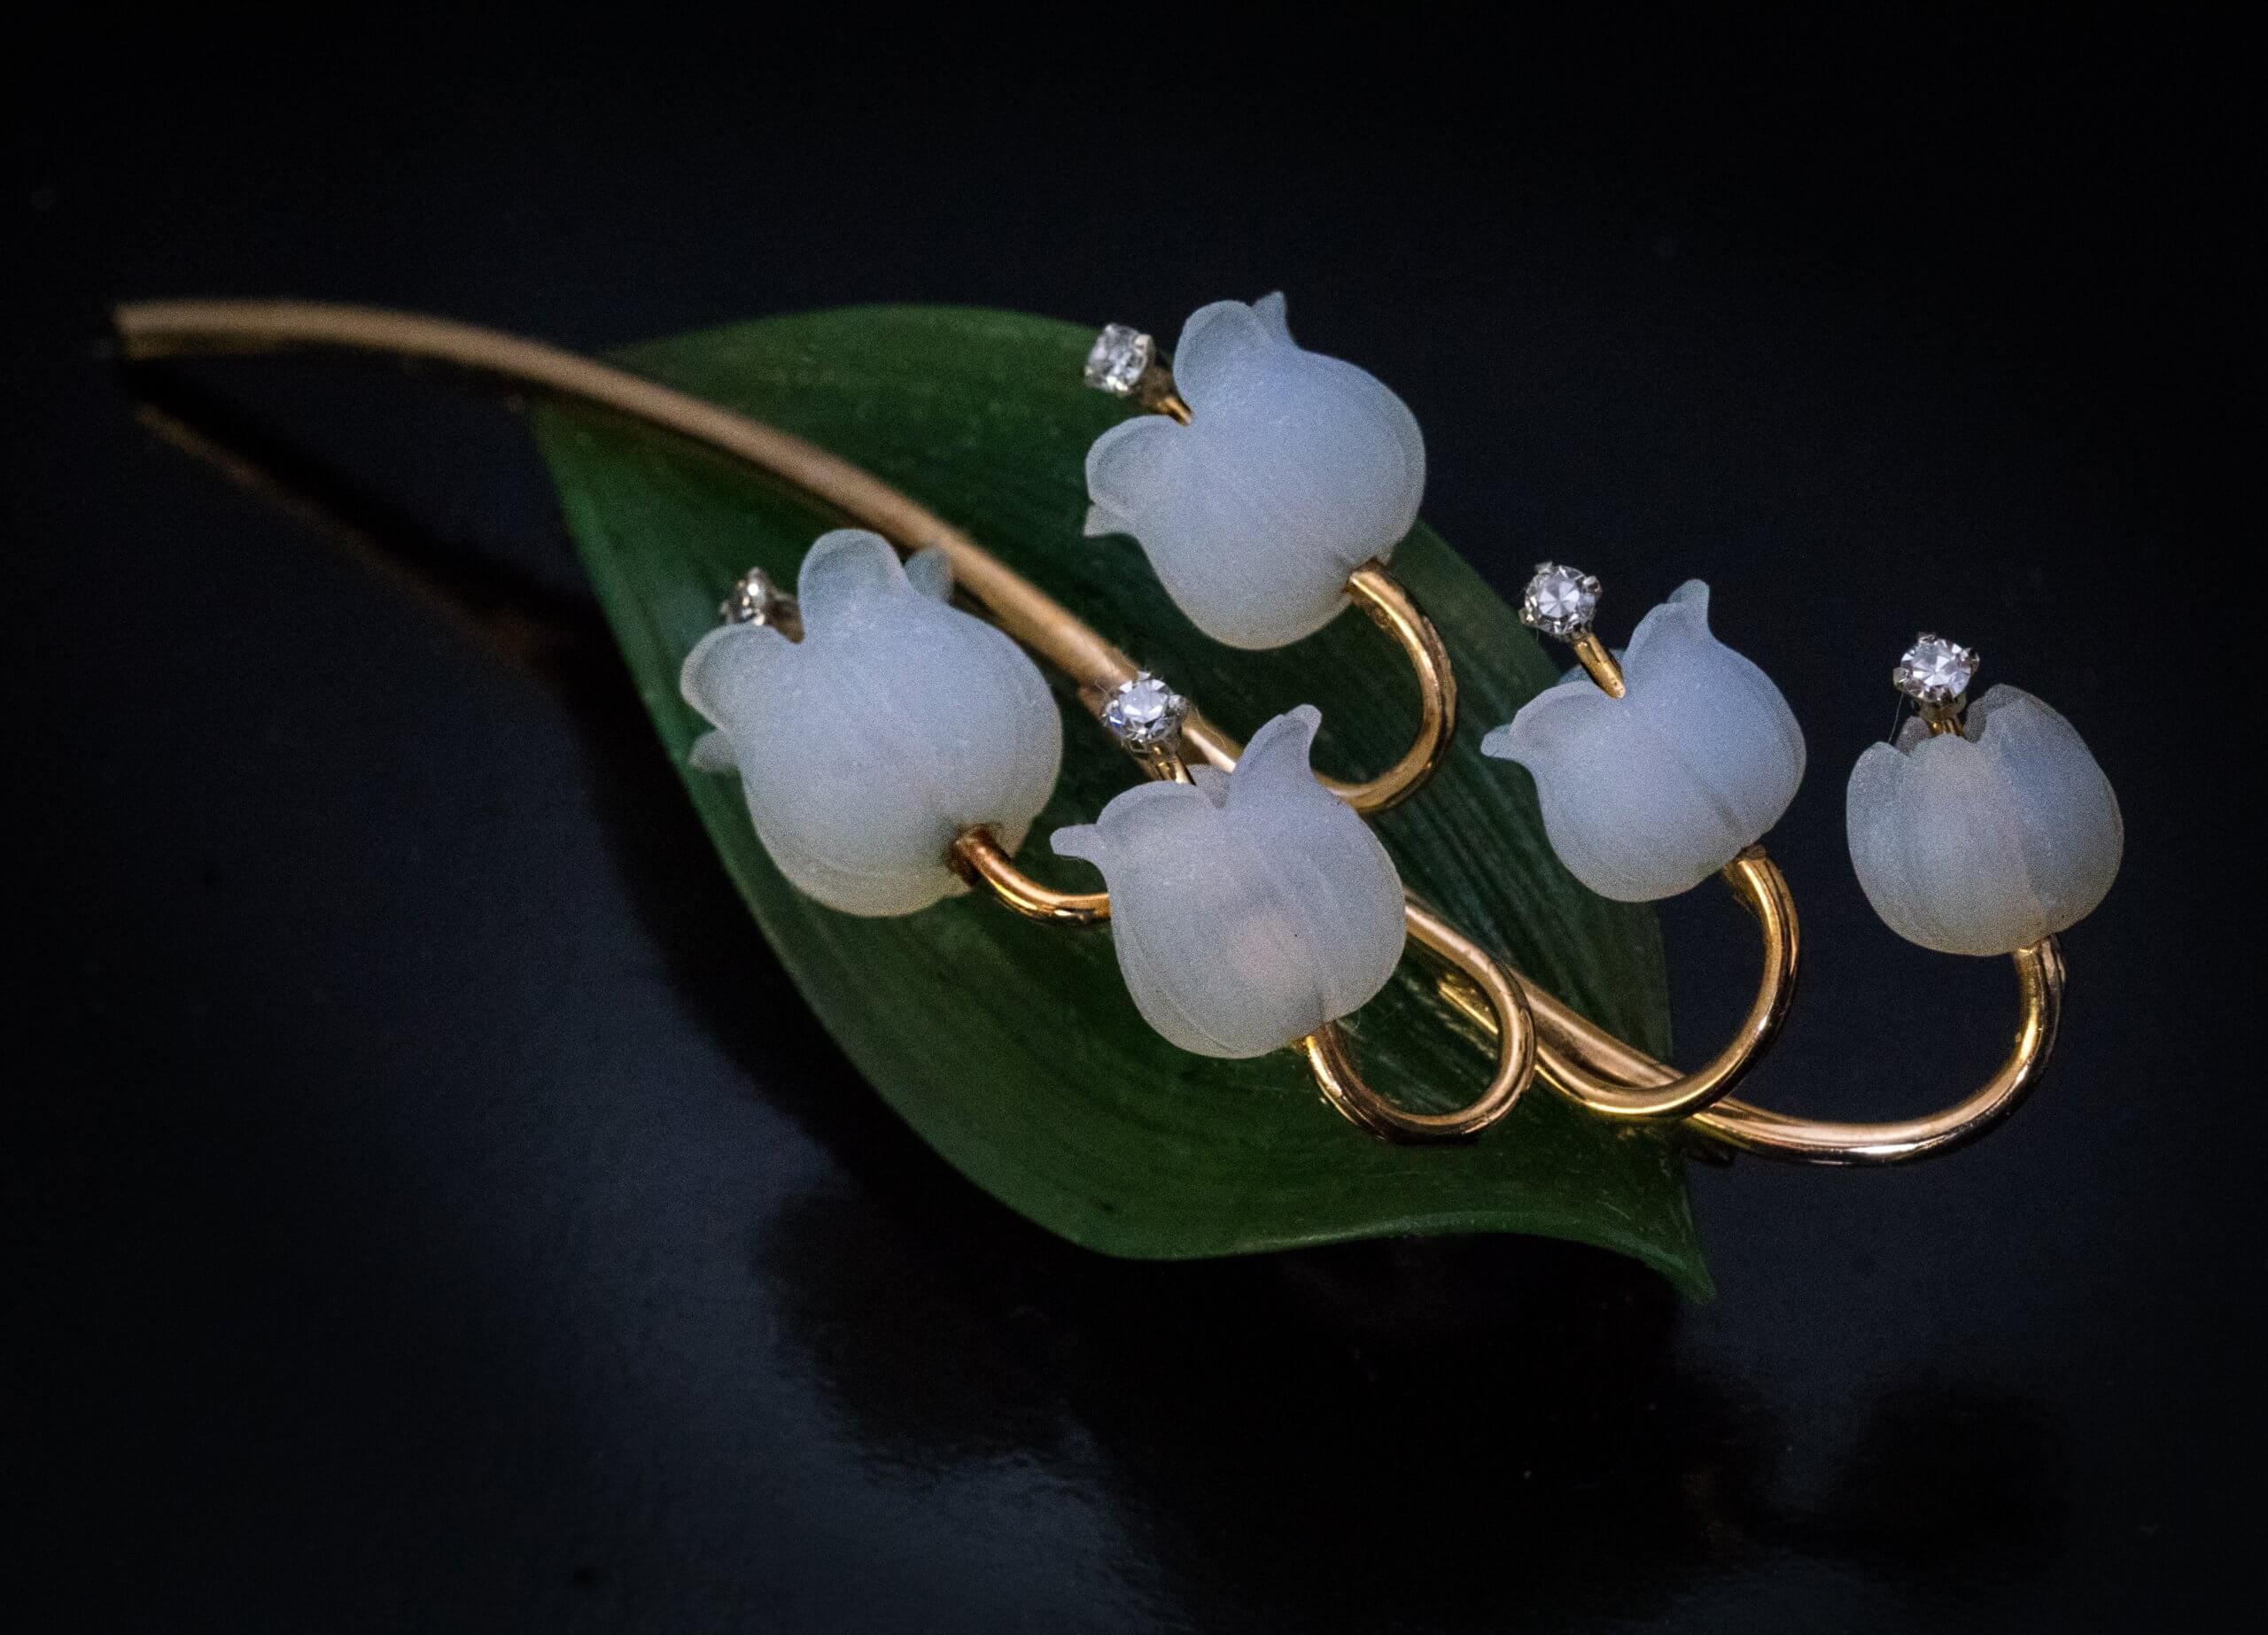 Made in Vienna, Austria in the 1950s.  The brooch is finely modeled as a lily of the valley. The flower heads are superbly carved from frosted agate and embellished with small diamonds. The green leaf is naturalistically carved from a single piece